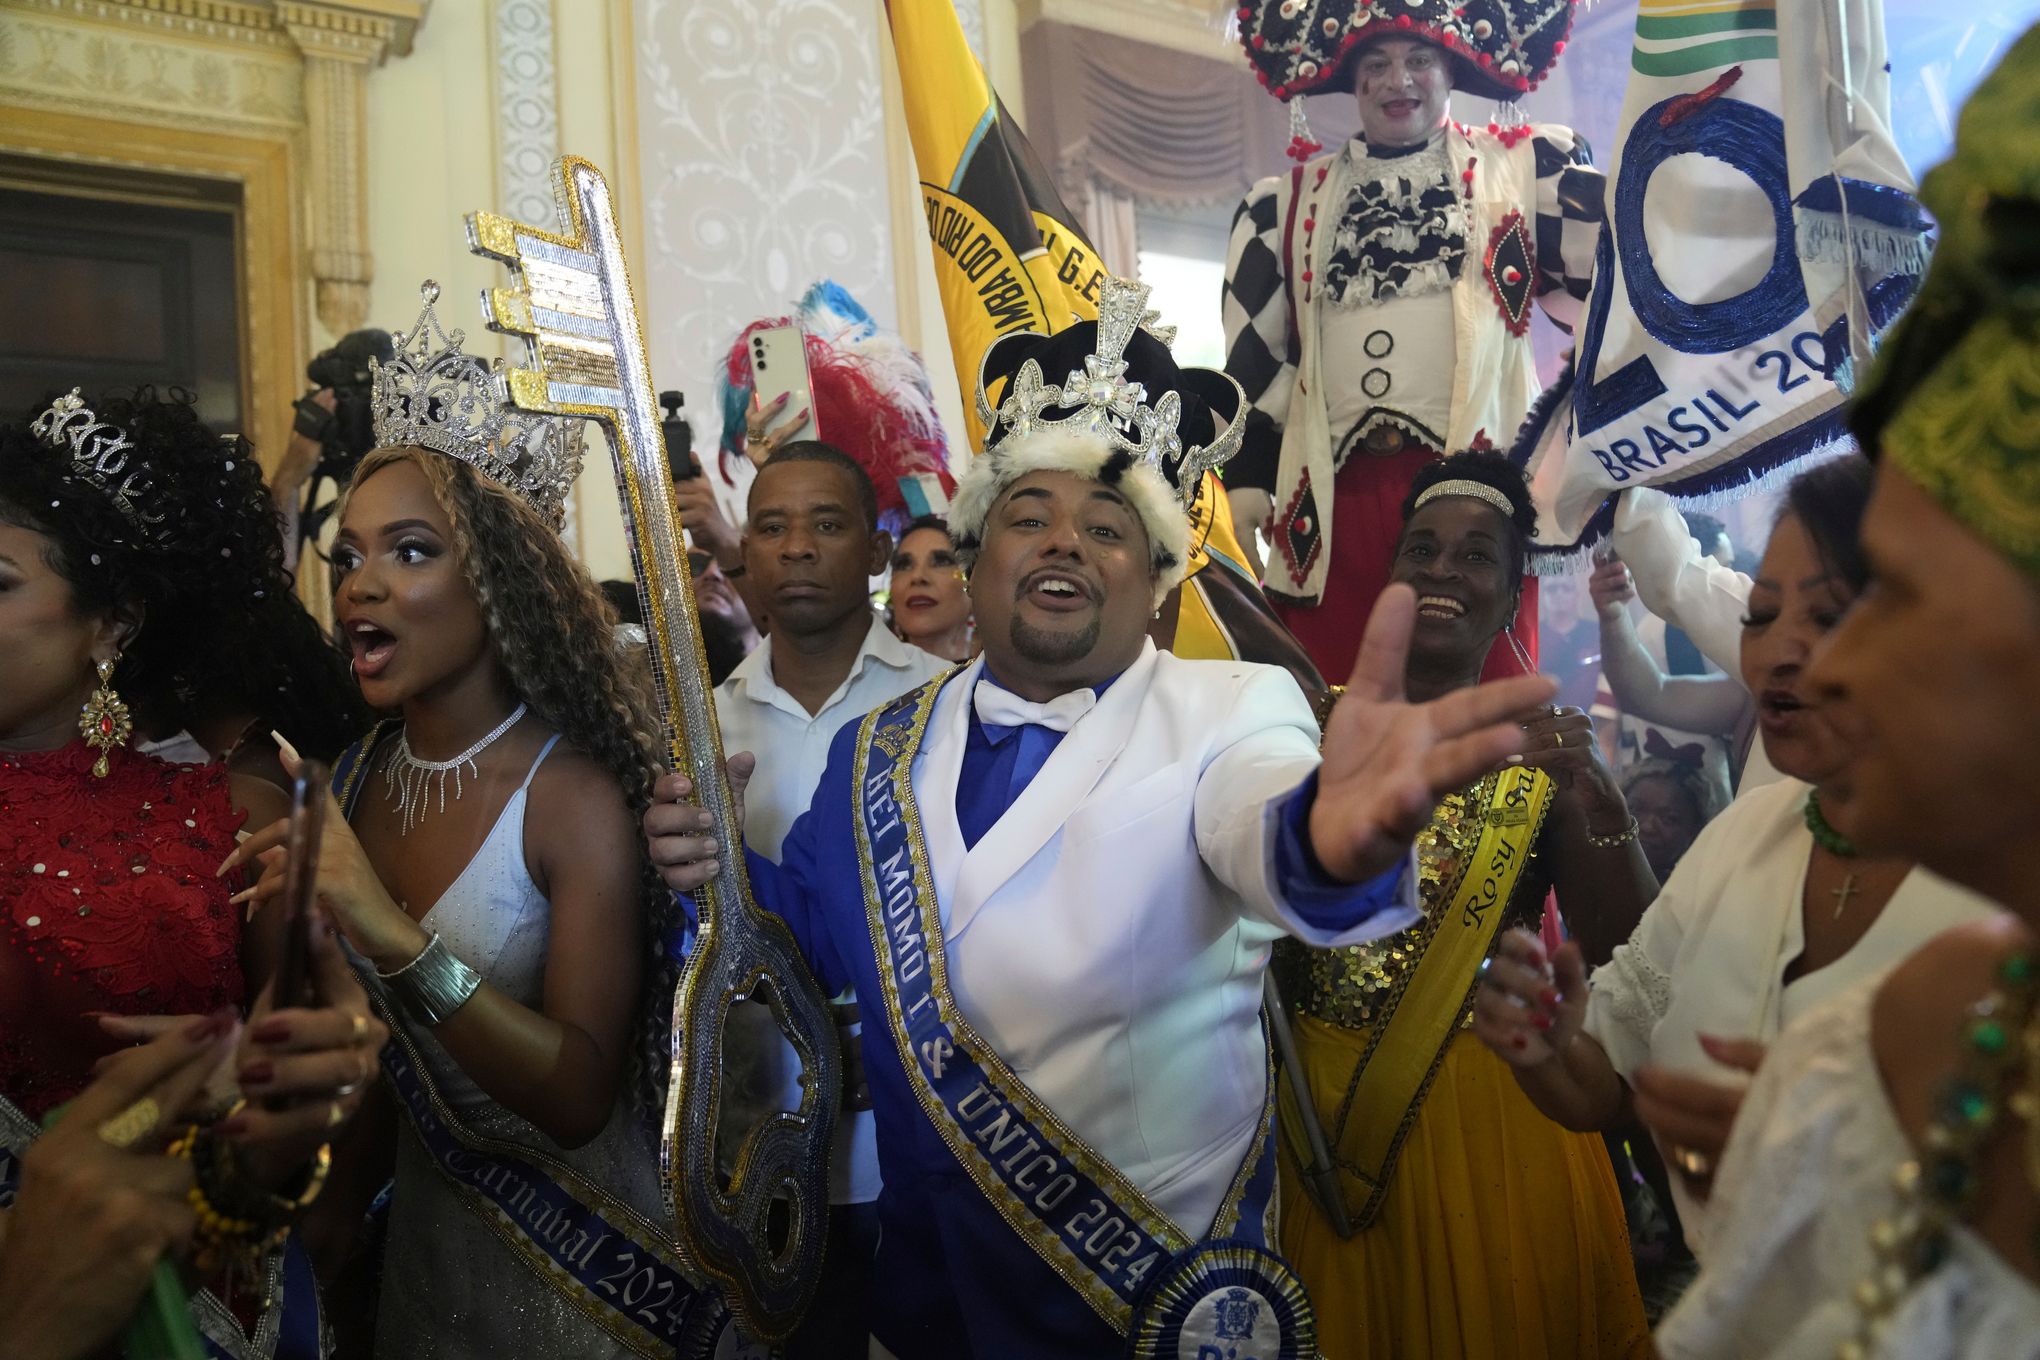 It's all so cheerless': Rio mourns loss of carnival's noise and